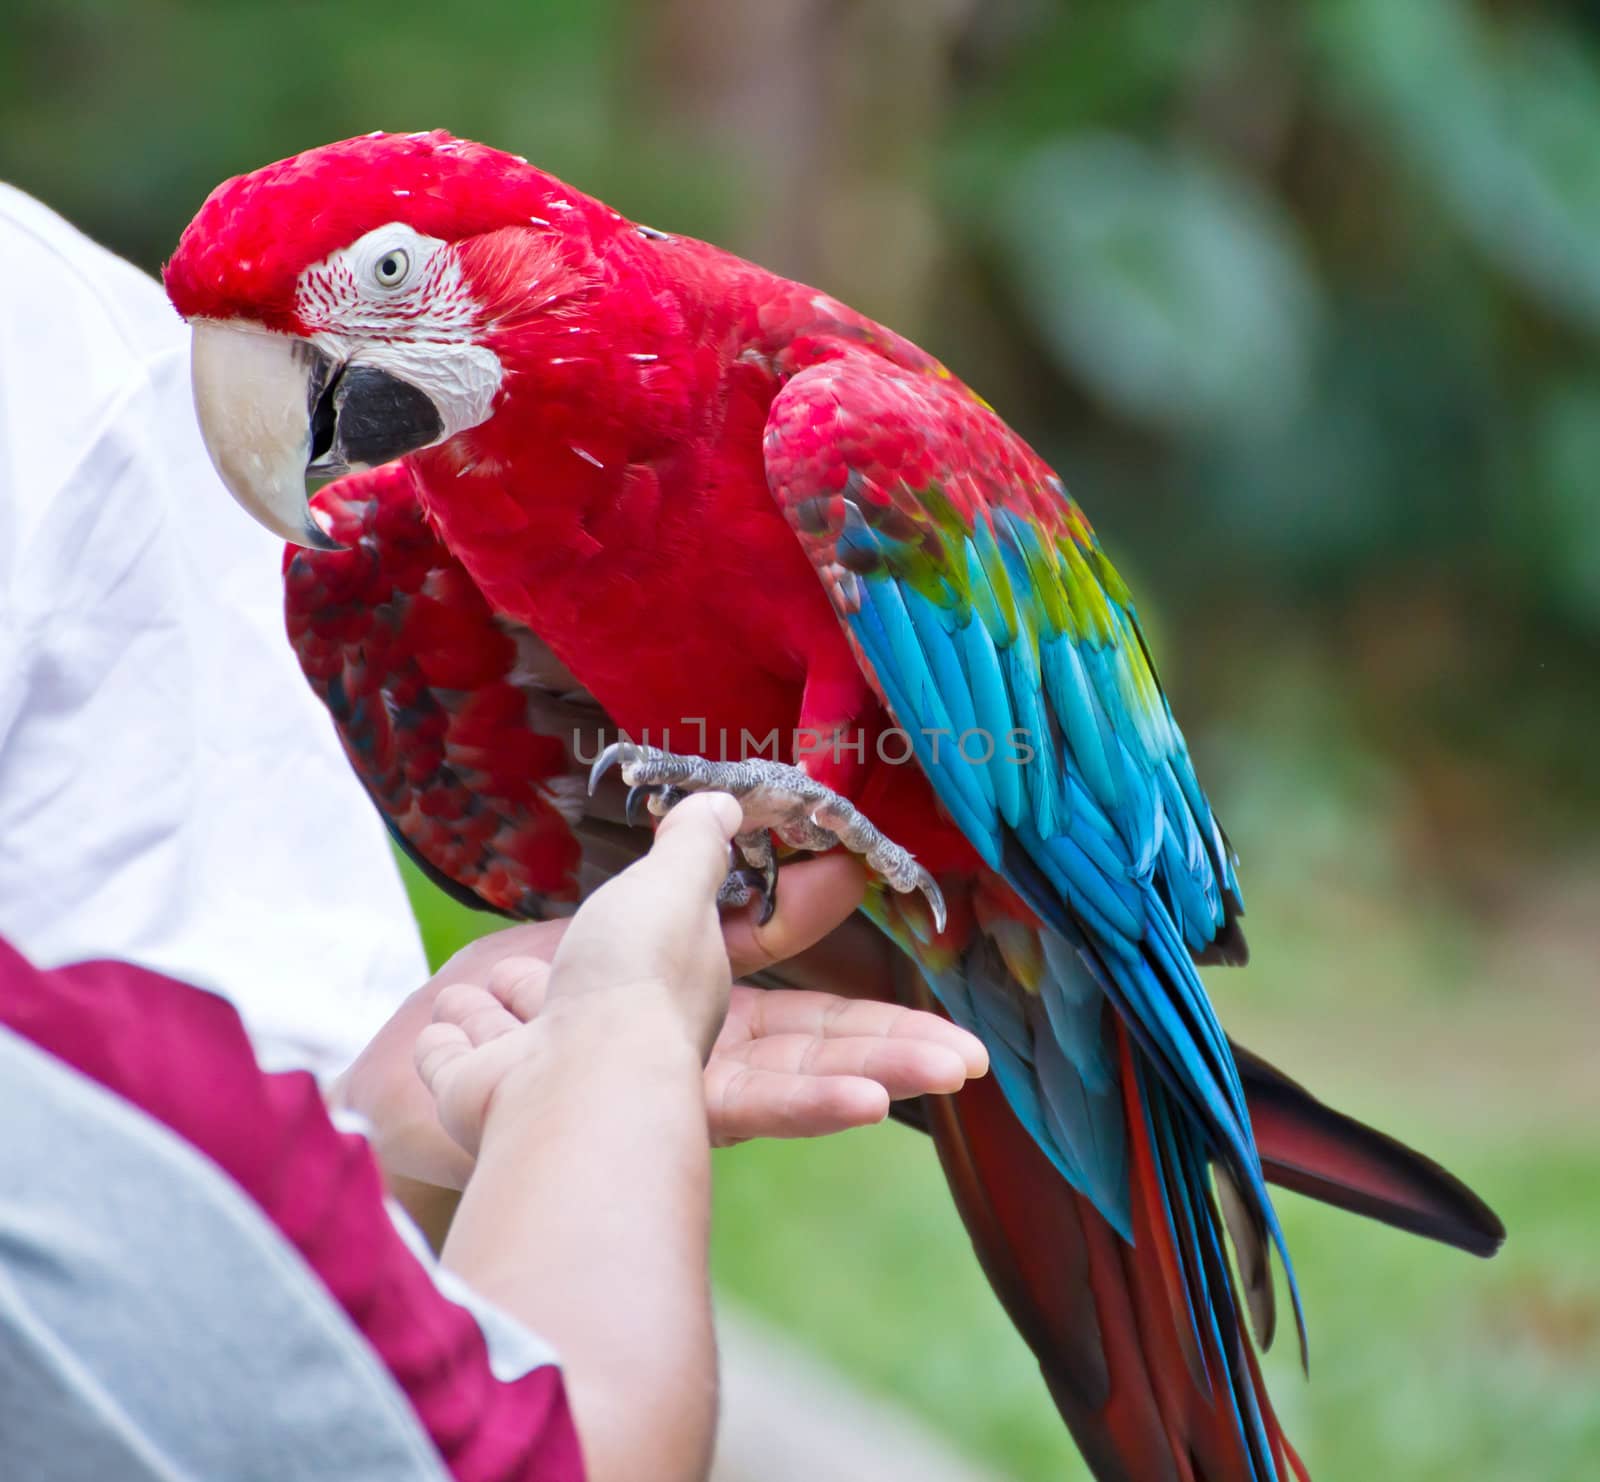 Macaw parrot on the hand